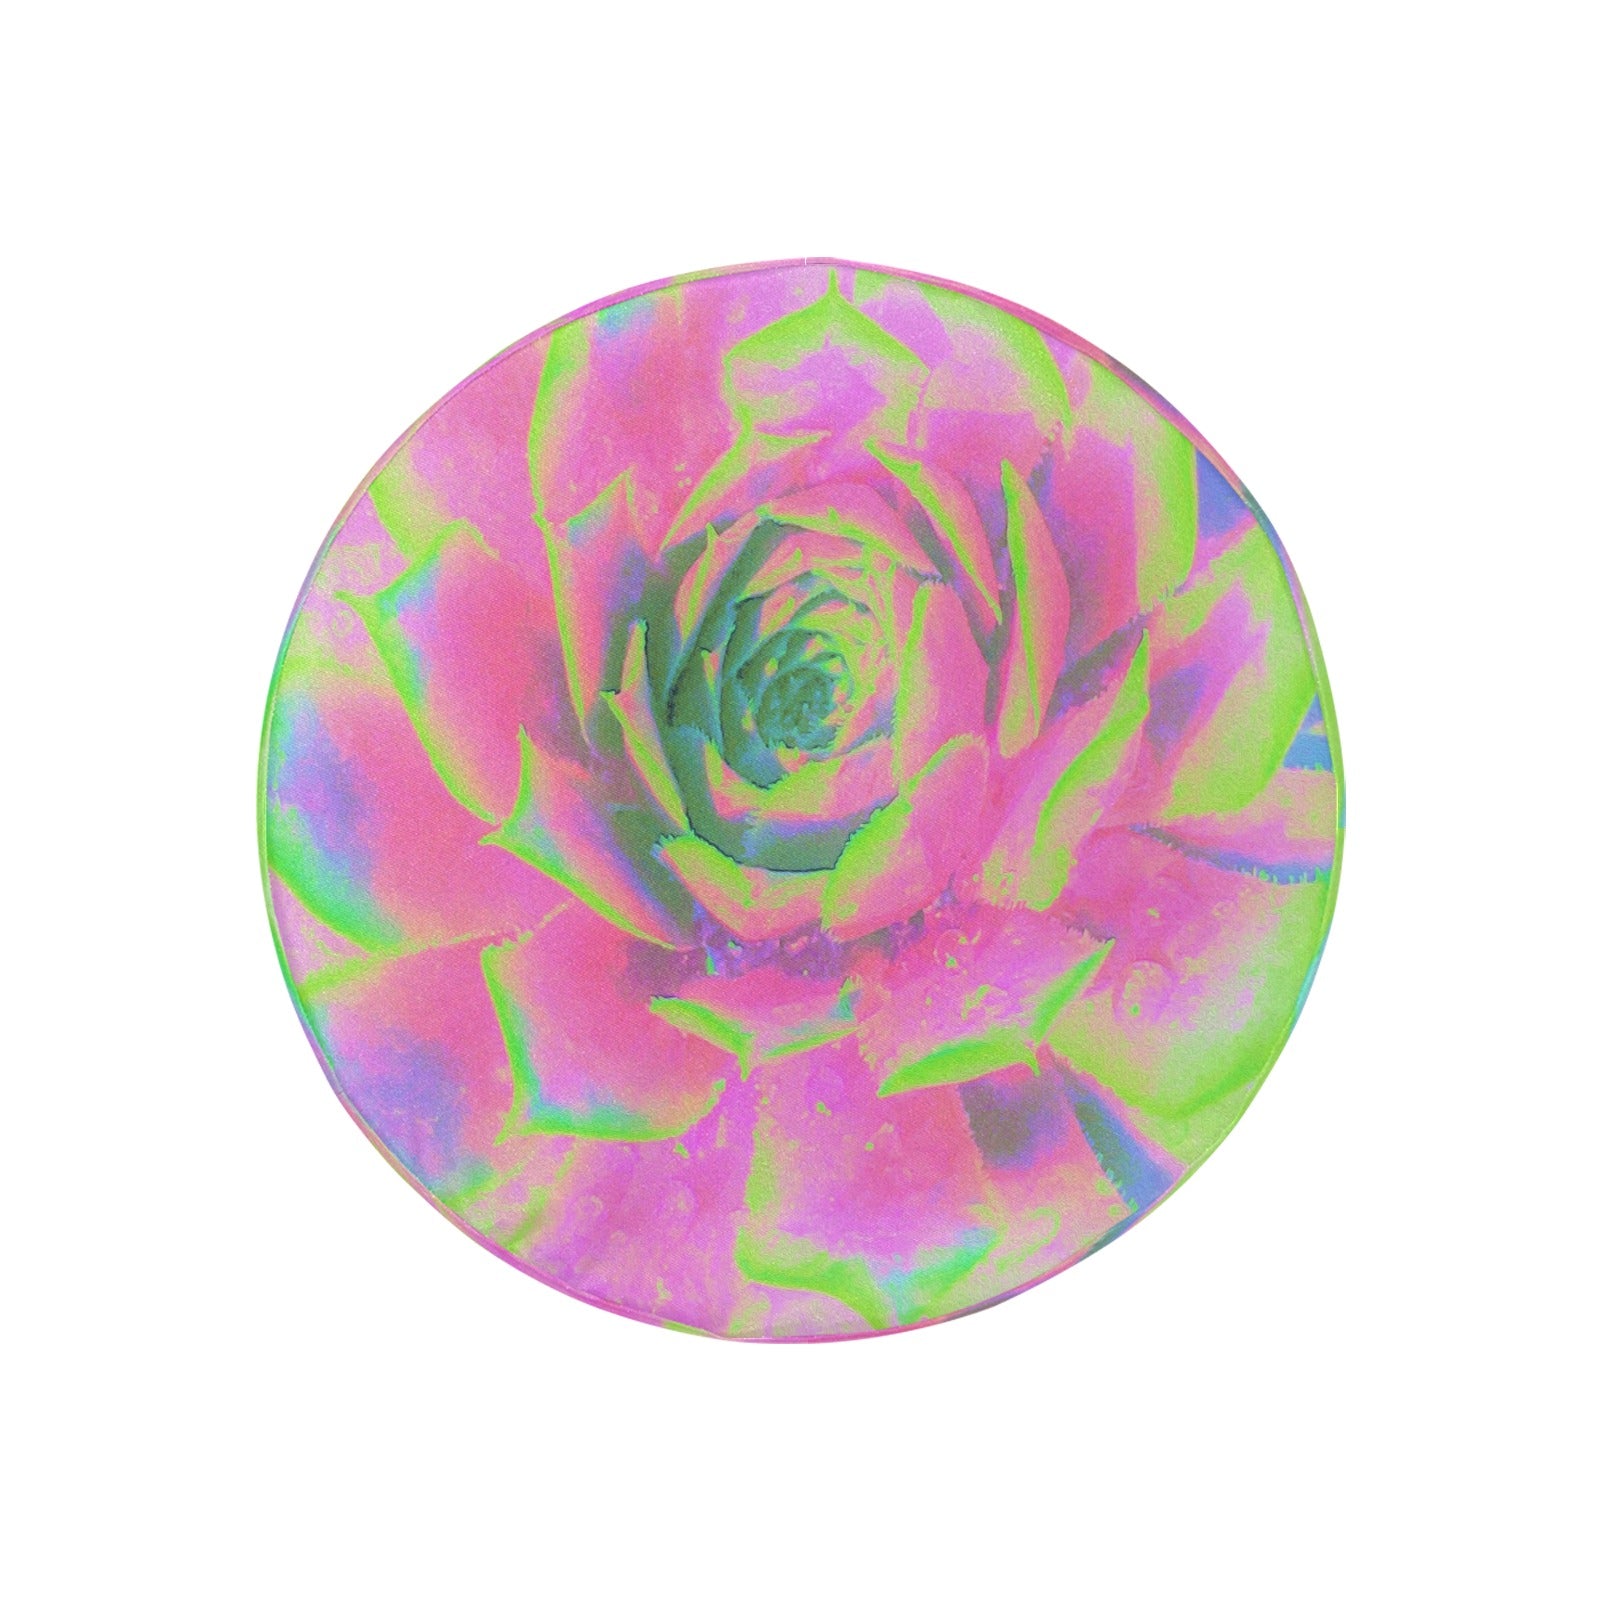 Spare Tire Covers, Lime Green and Pink Succulent Sedum Rosette - Small